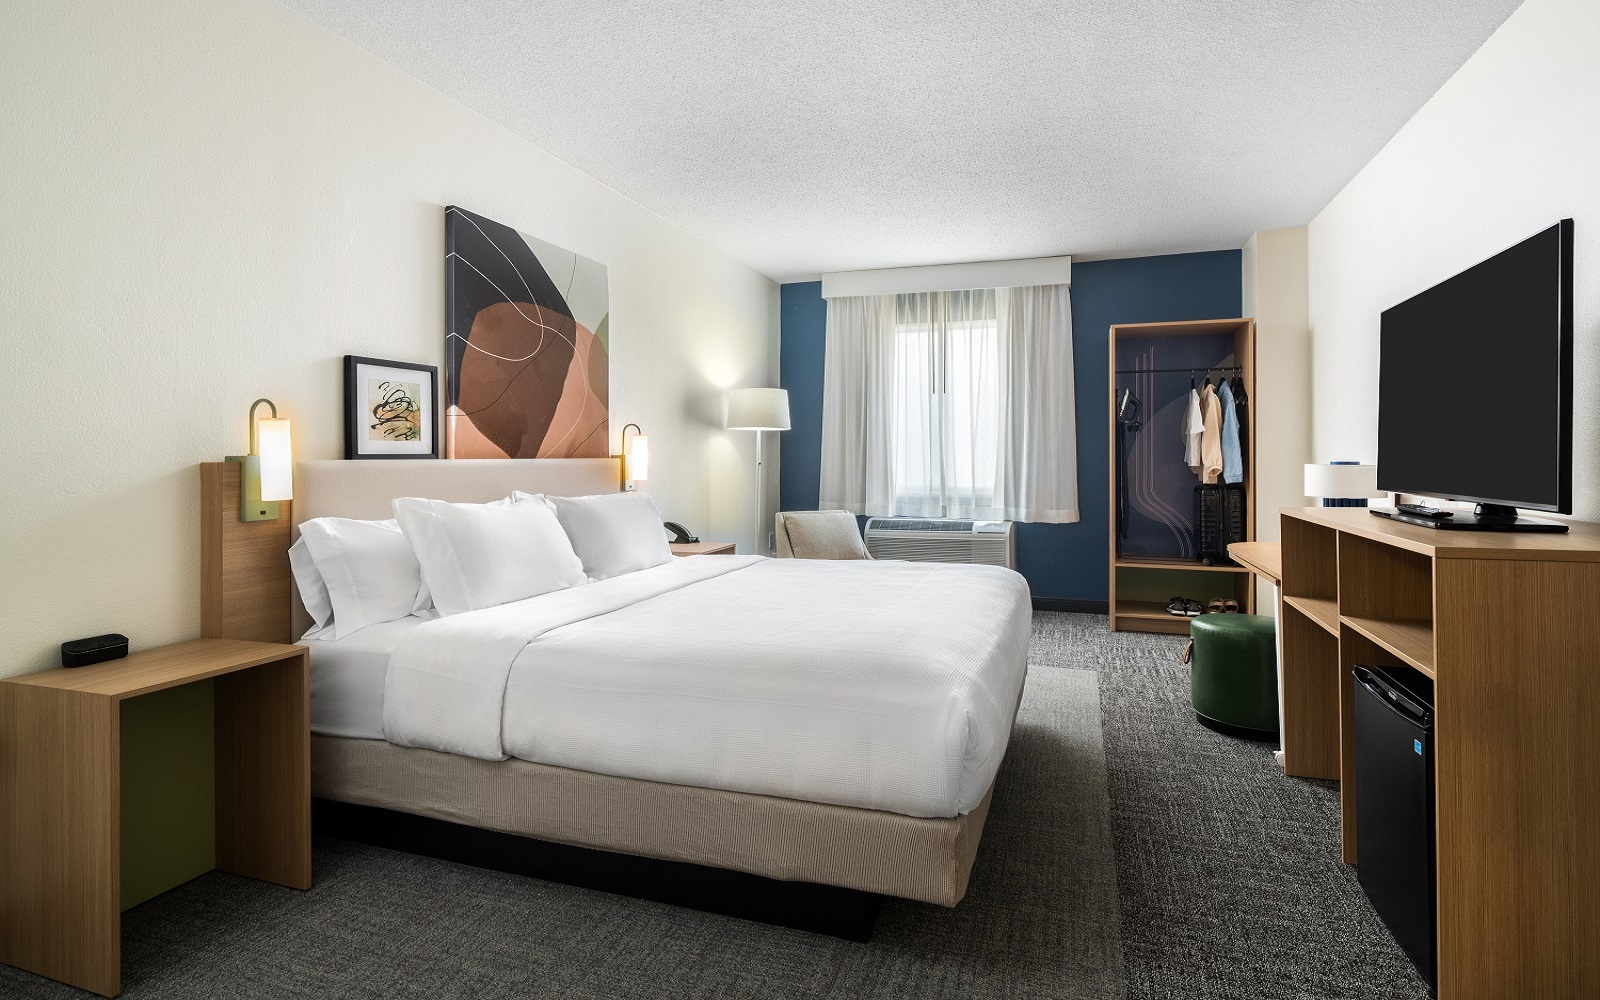 Spark by Hilton guestroom with kingsize bed